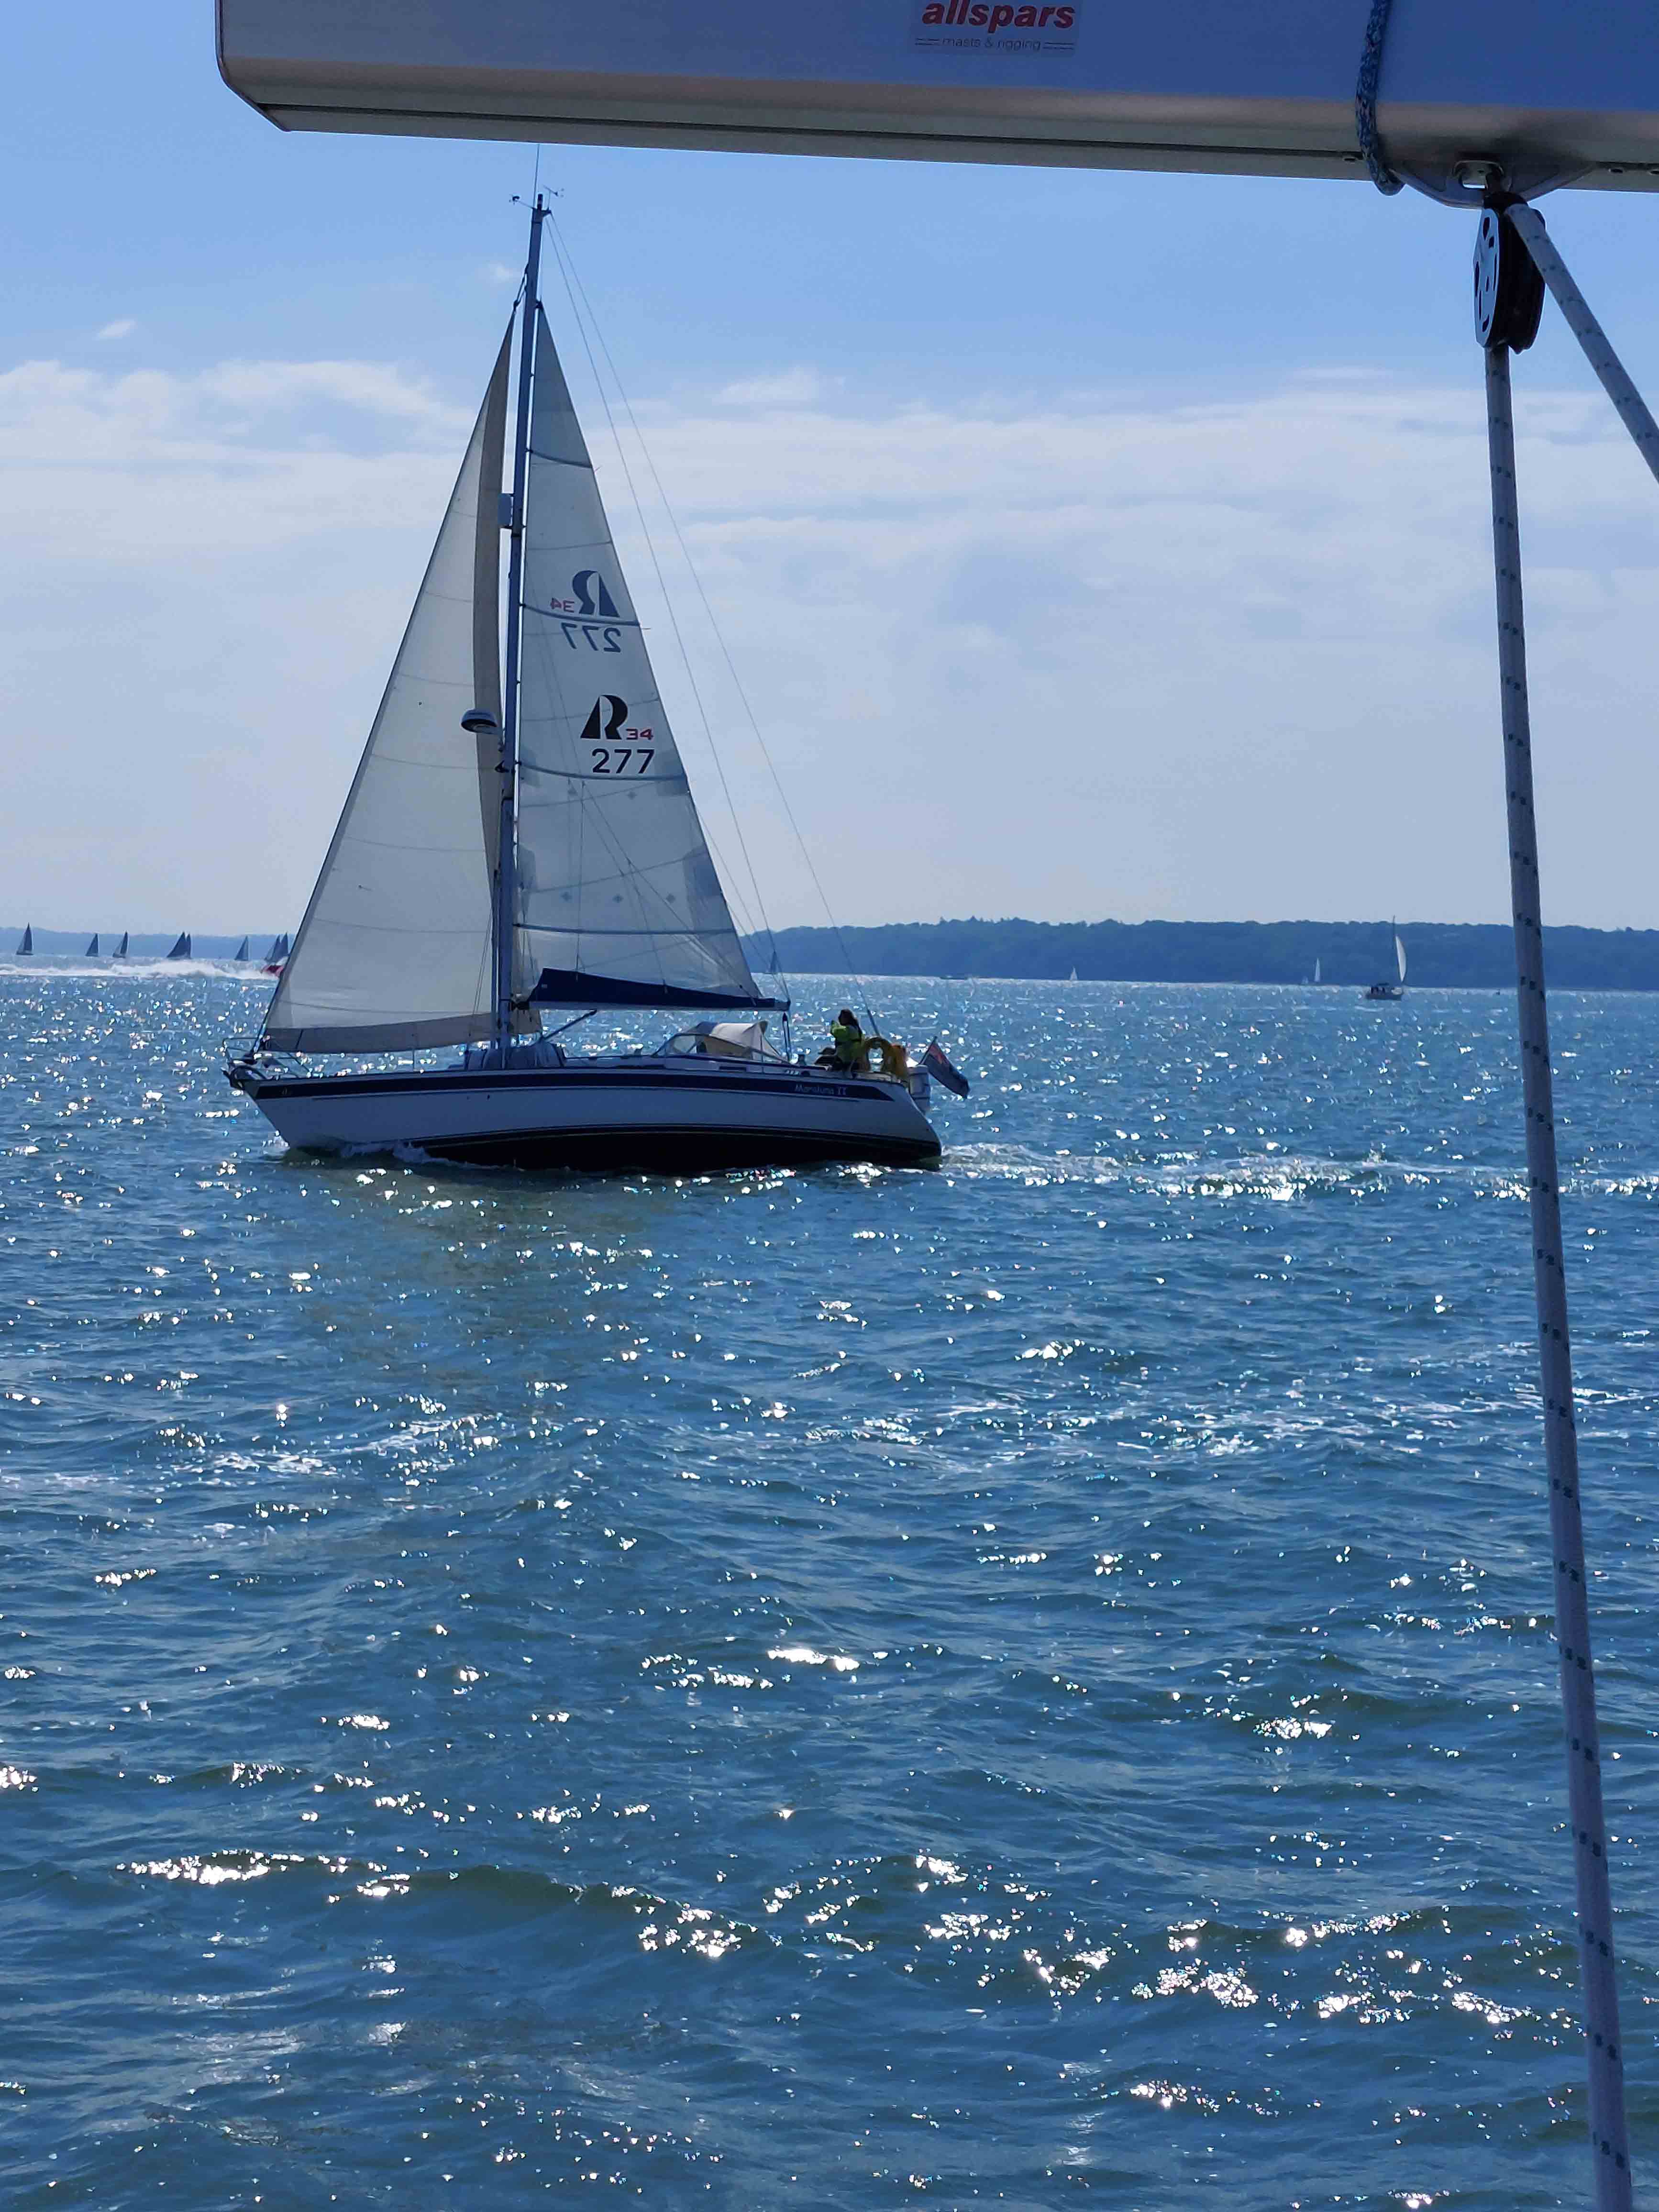 A sail boat out on the water on a sunny day.